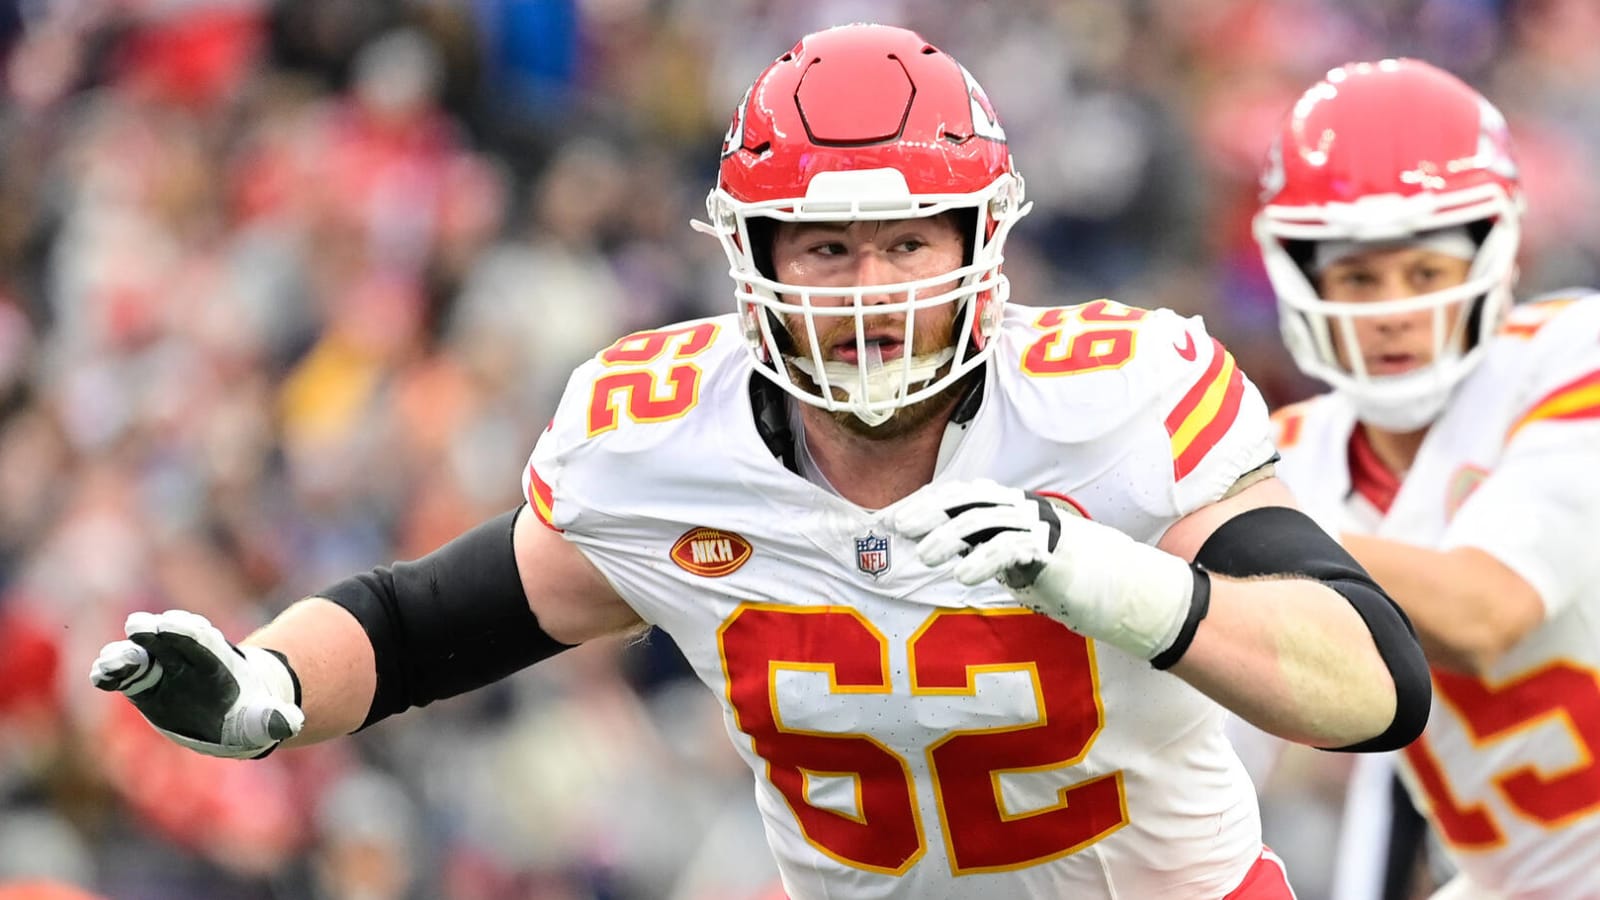 Chiefs could be missing key player against Ravens